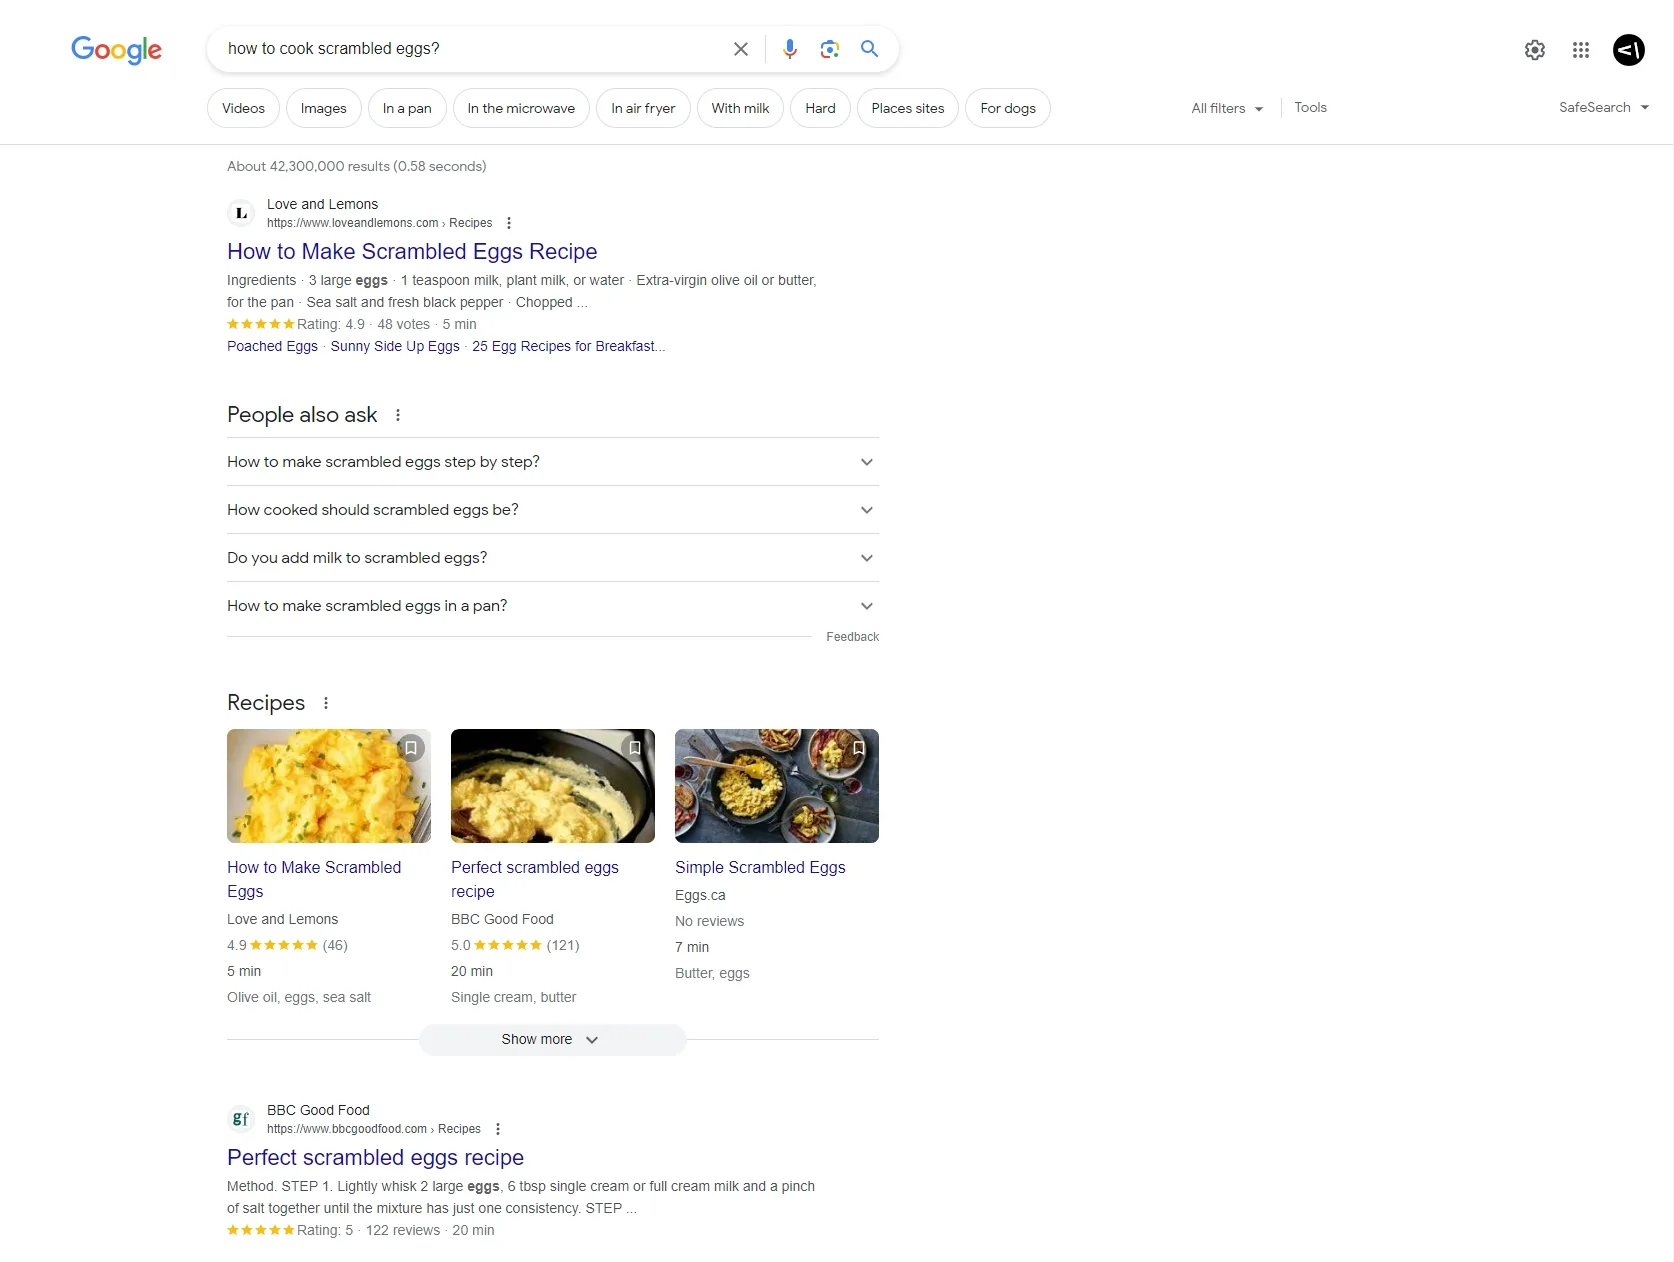 How to cook scrambled eggs - Google Search Results